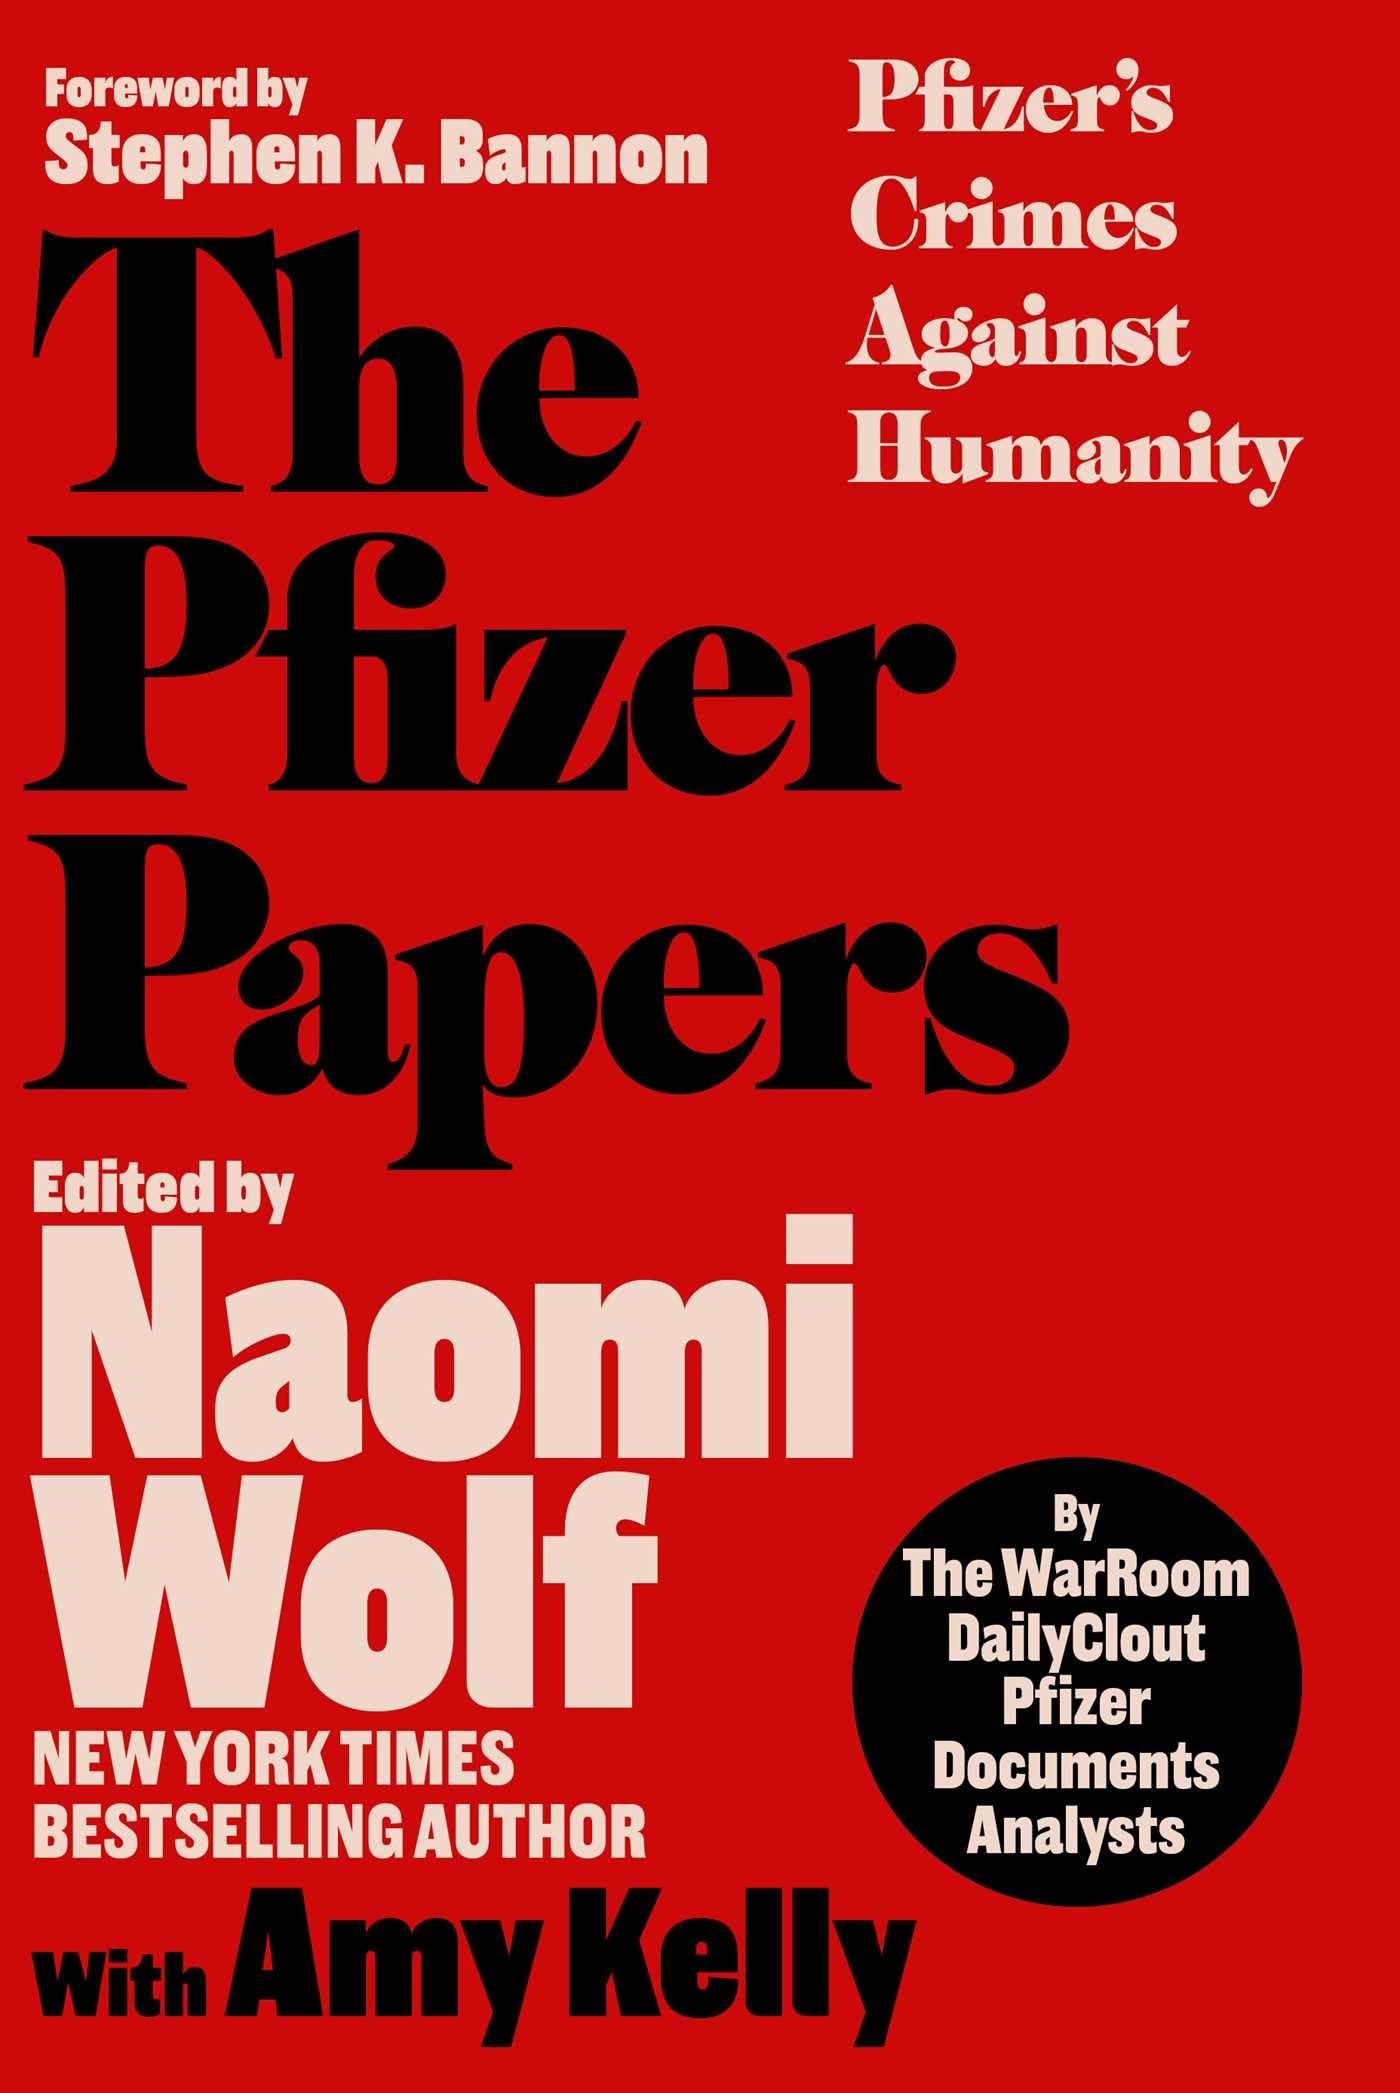 The Pfizer Papers: Pfizer's Crimes Against Humanity by The Warroom/Dailyclout Pfizer Documents